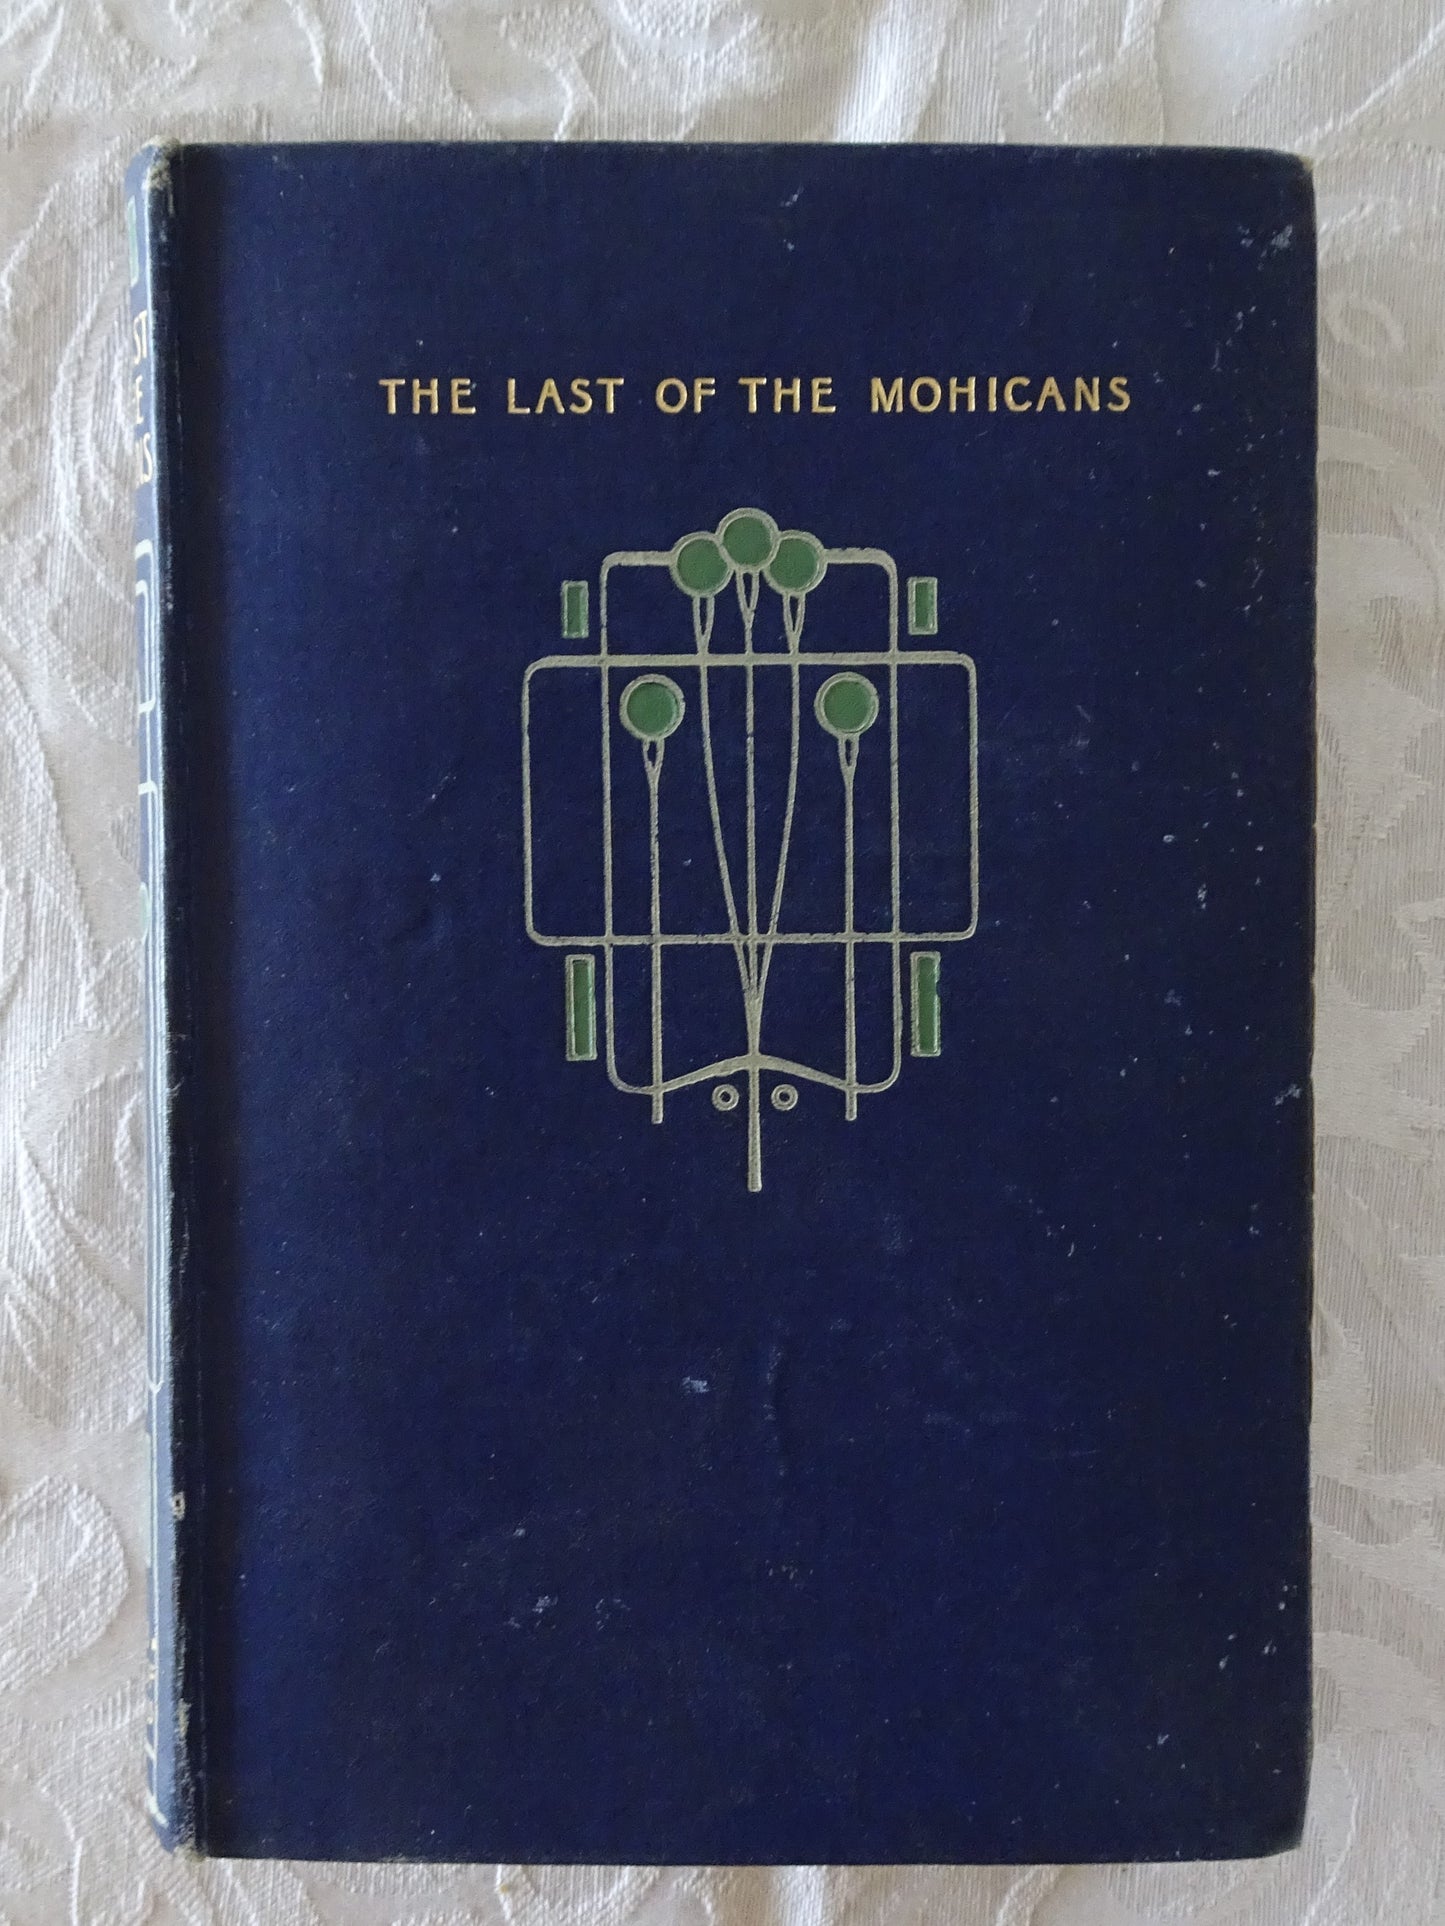 The Last of the Mohicans by J. Fenimore Cooper